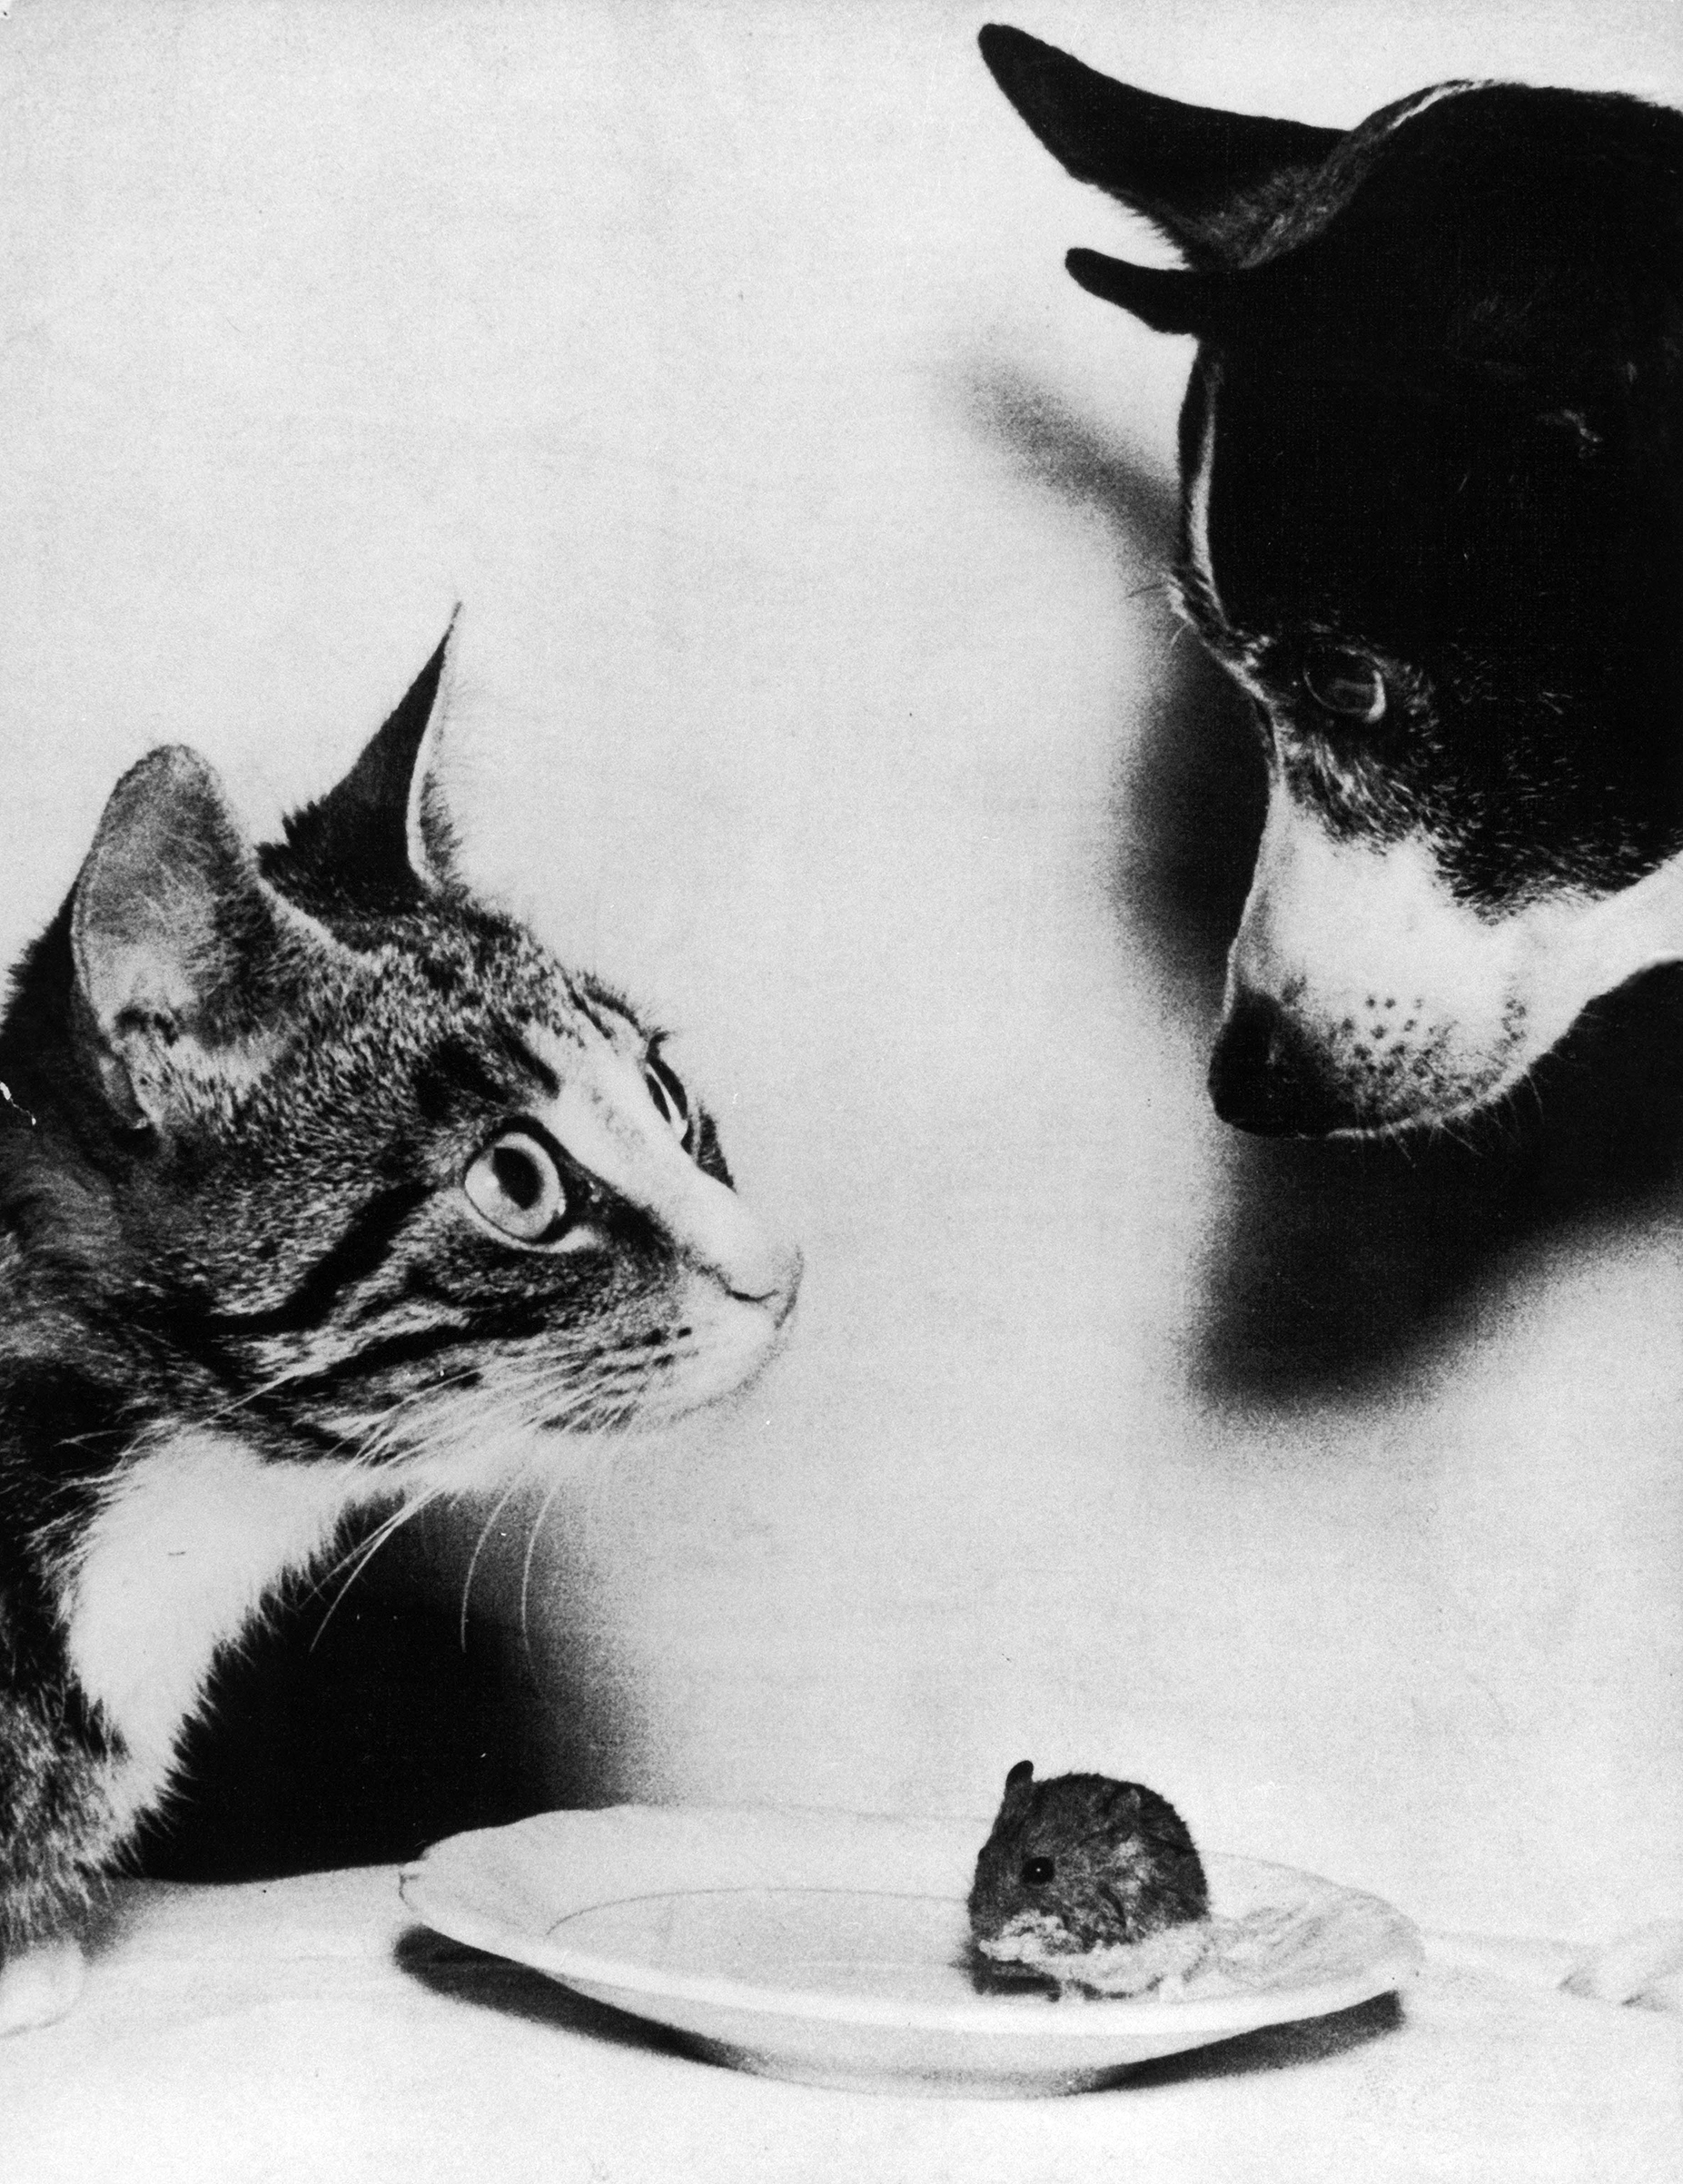 Pets of the Lyng family, Mitten the cat, Tosen the dog and an unnamed mouse, 1955.